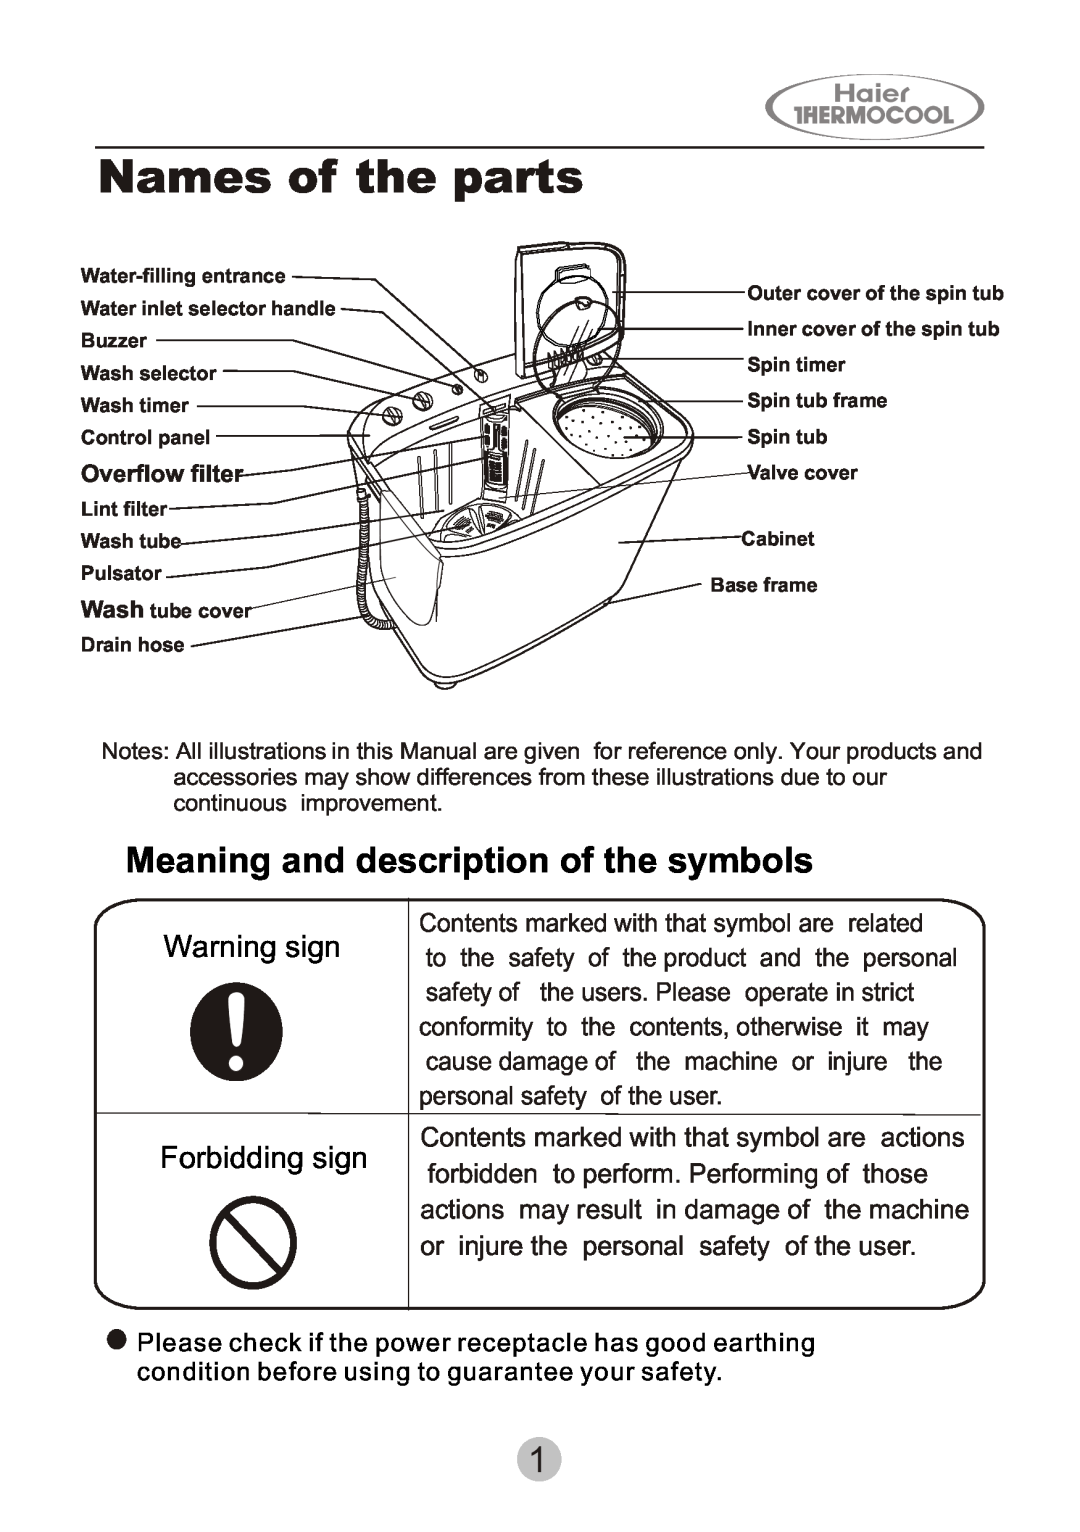 Haier HWM130-0523S user manual Names of the parts, Meaning and description of the symbols, Warning sign Forbidding sign 